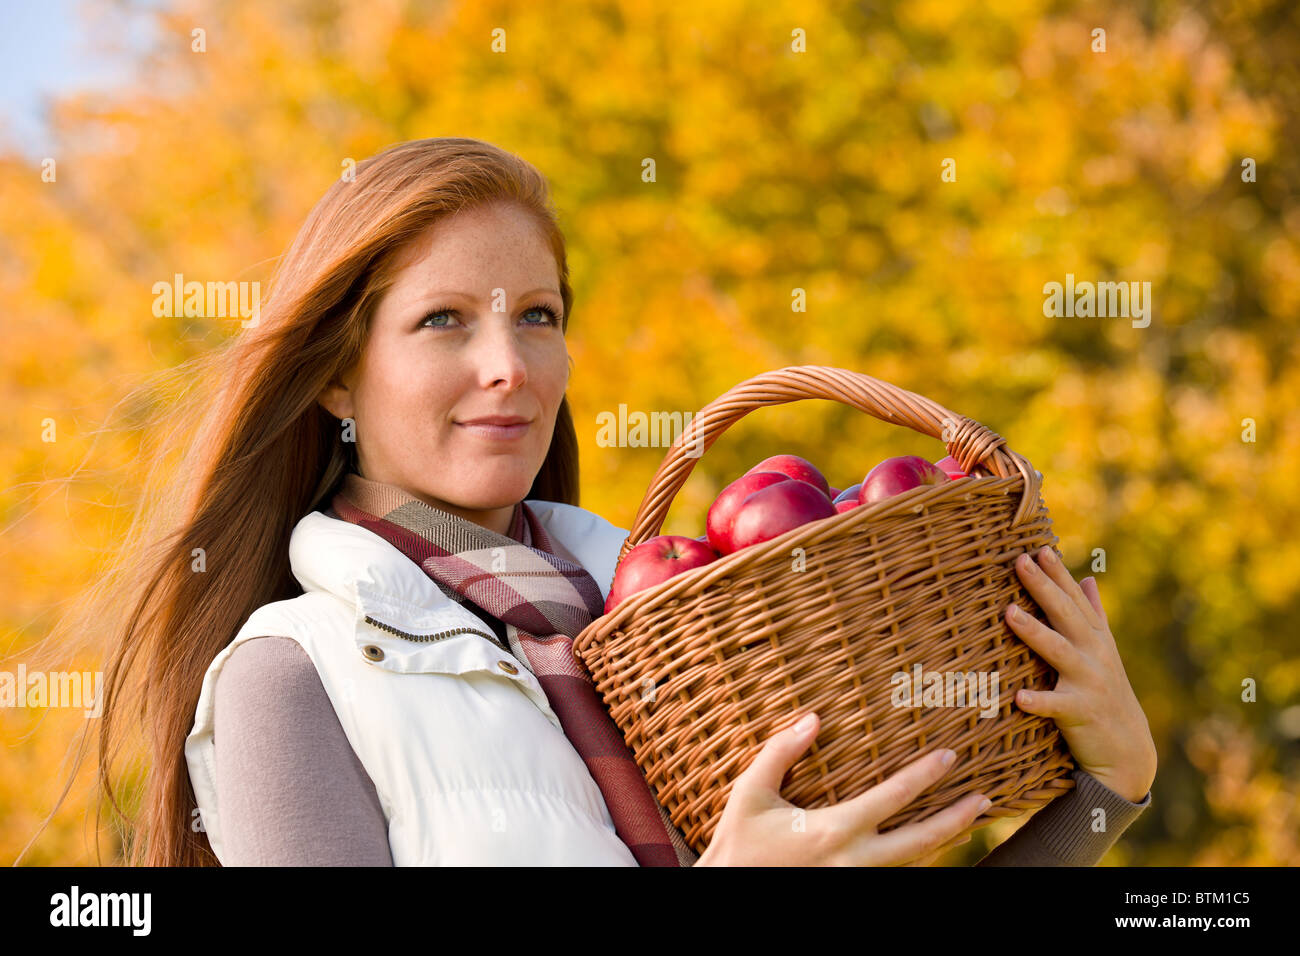 Autumn country - woman with wicker basket harvesting apple Stock Photo